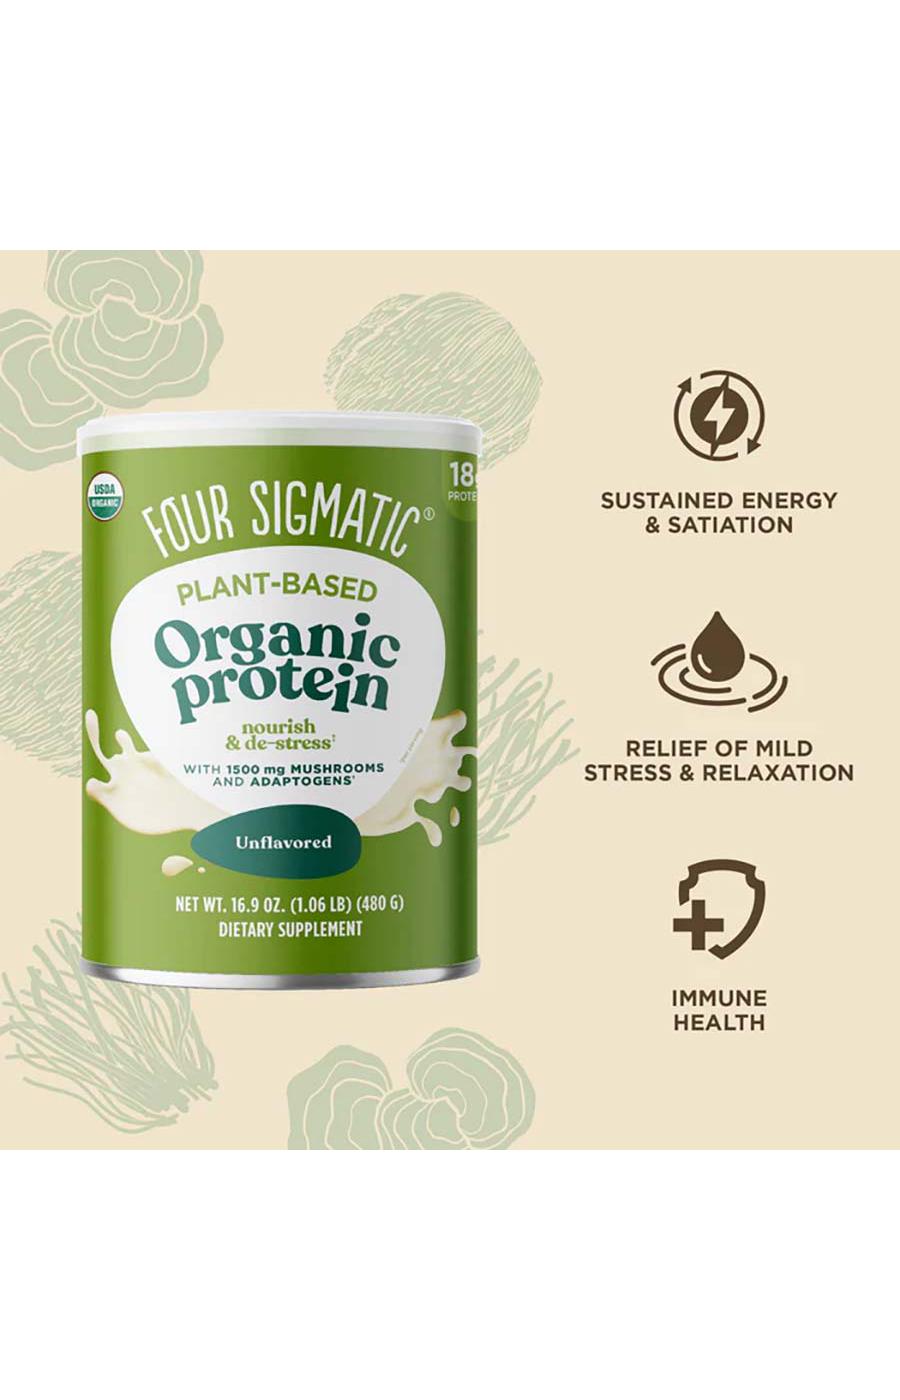 Four Sigmatic Plant-Based Organic 18g Protein Powder - Unflavored; image 2 of 4